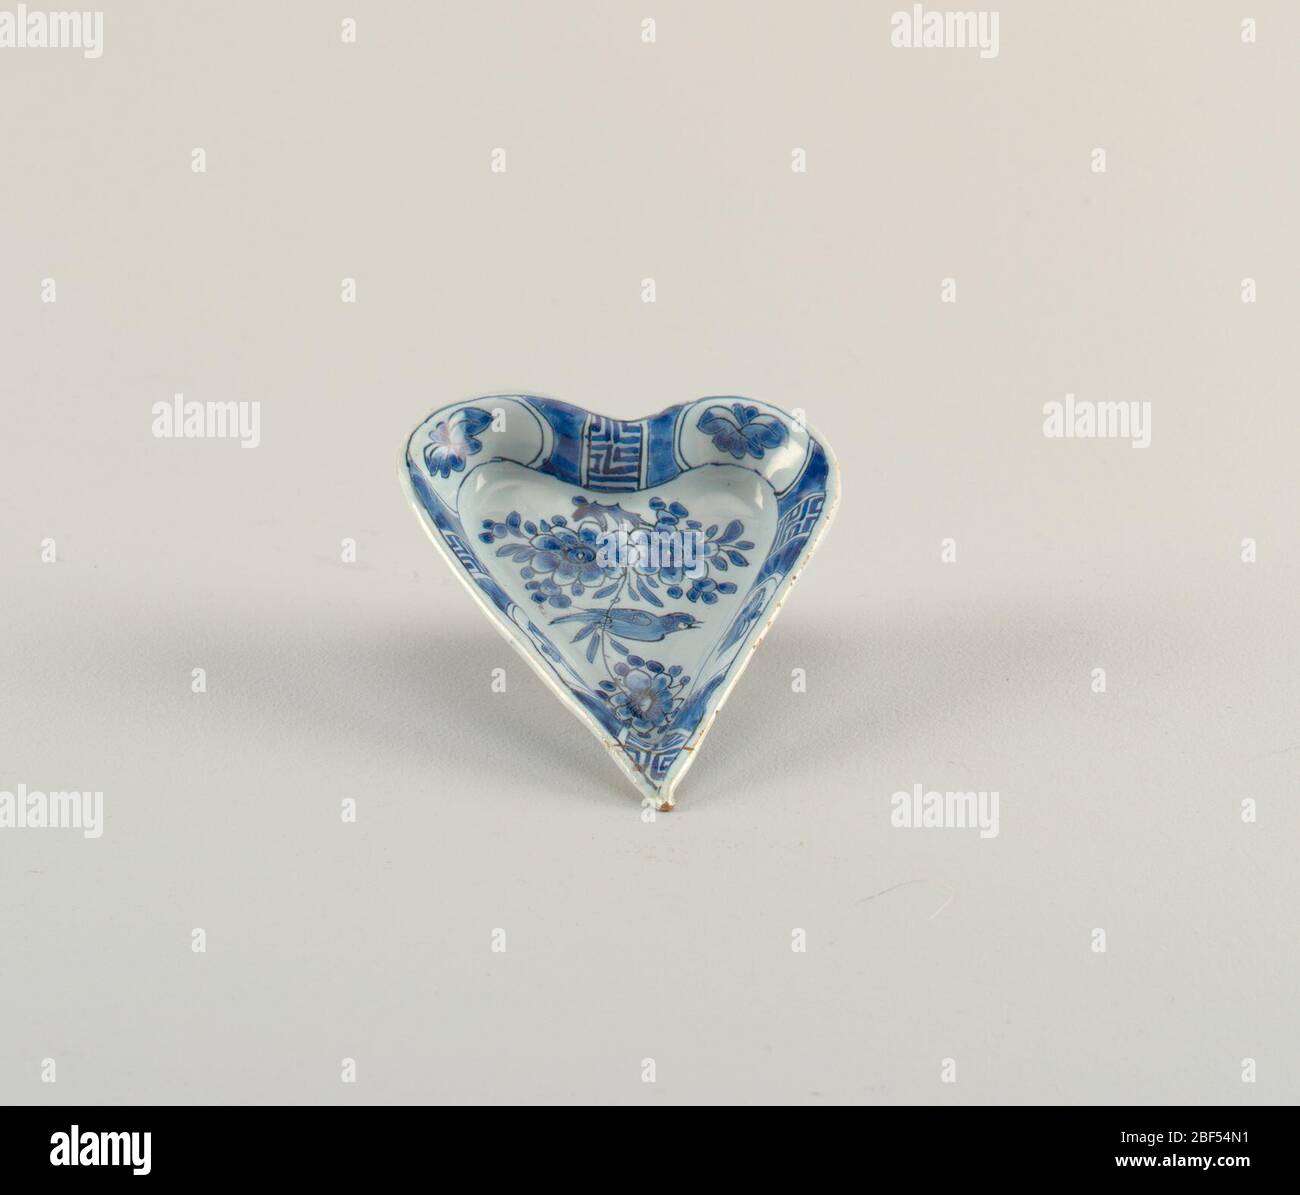 Dish. Heart-shaped dish on short foot rim with slightly flaring sides; painted inunderglaze blue on white with birds and flowers in center, on sides with alternating panels of flowers and pseudo-Chinoiserie characters. Stock Photo